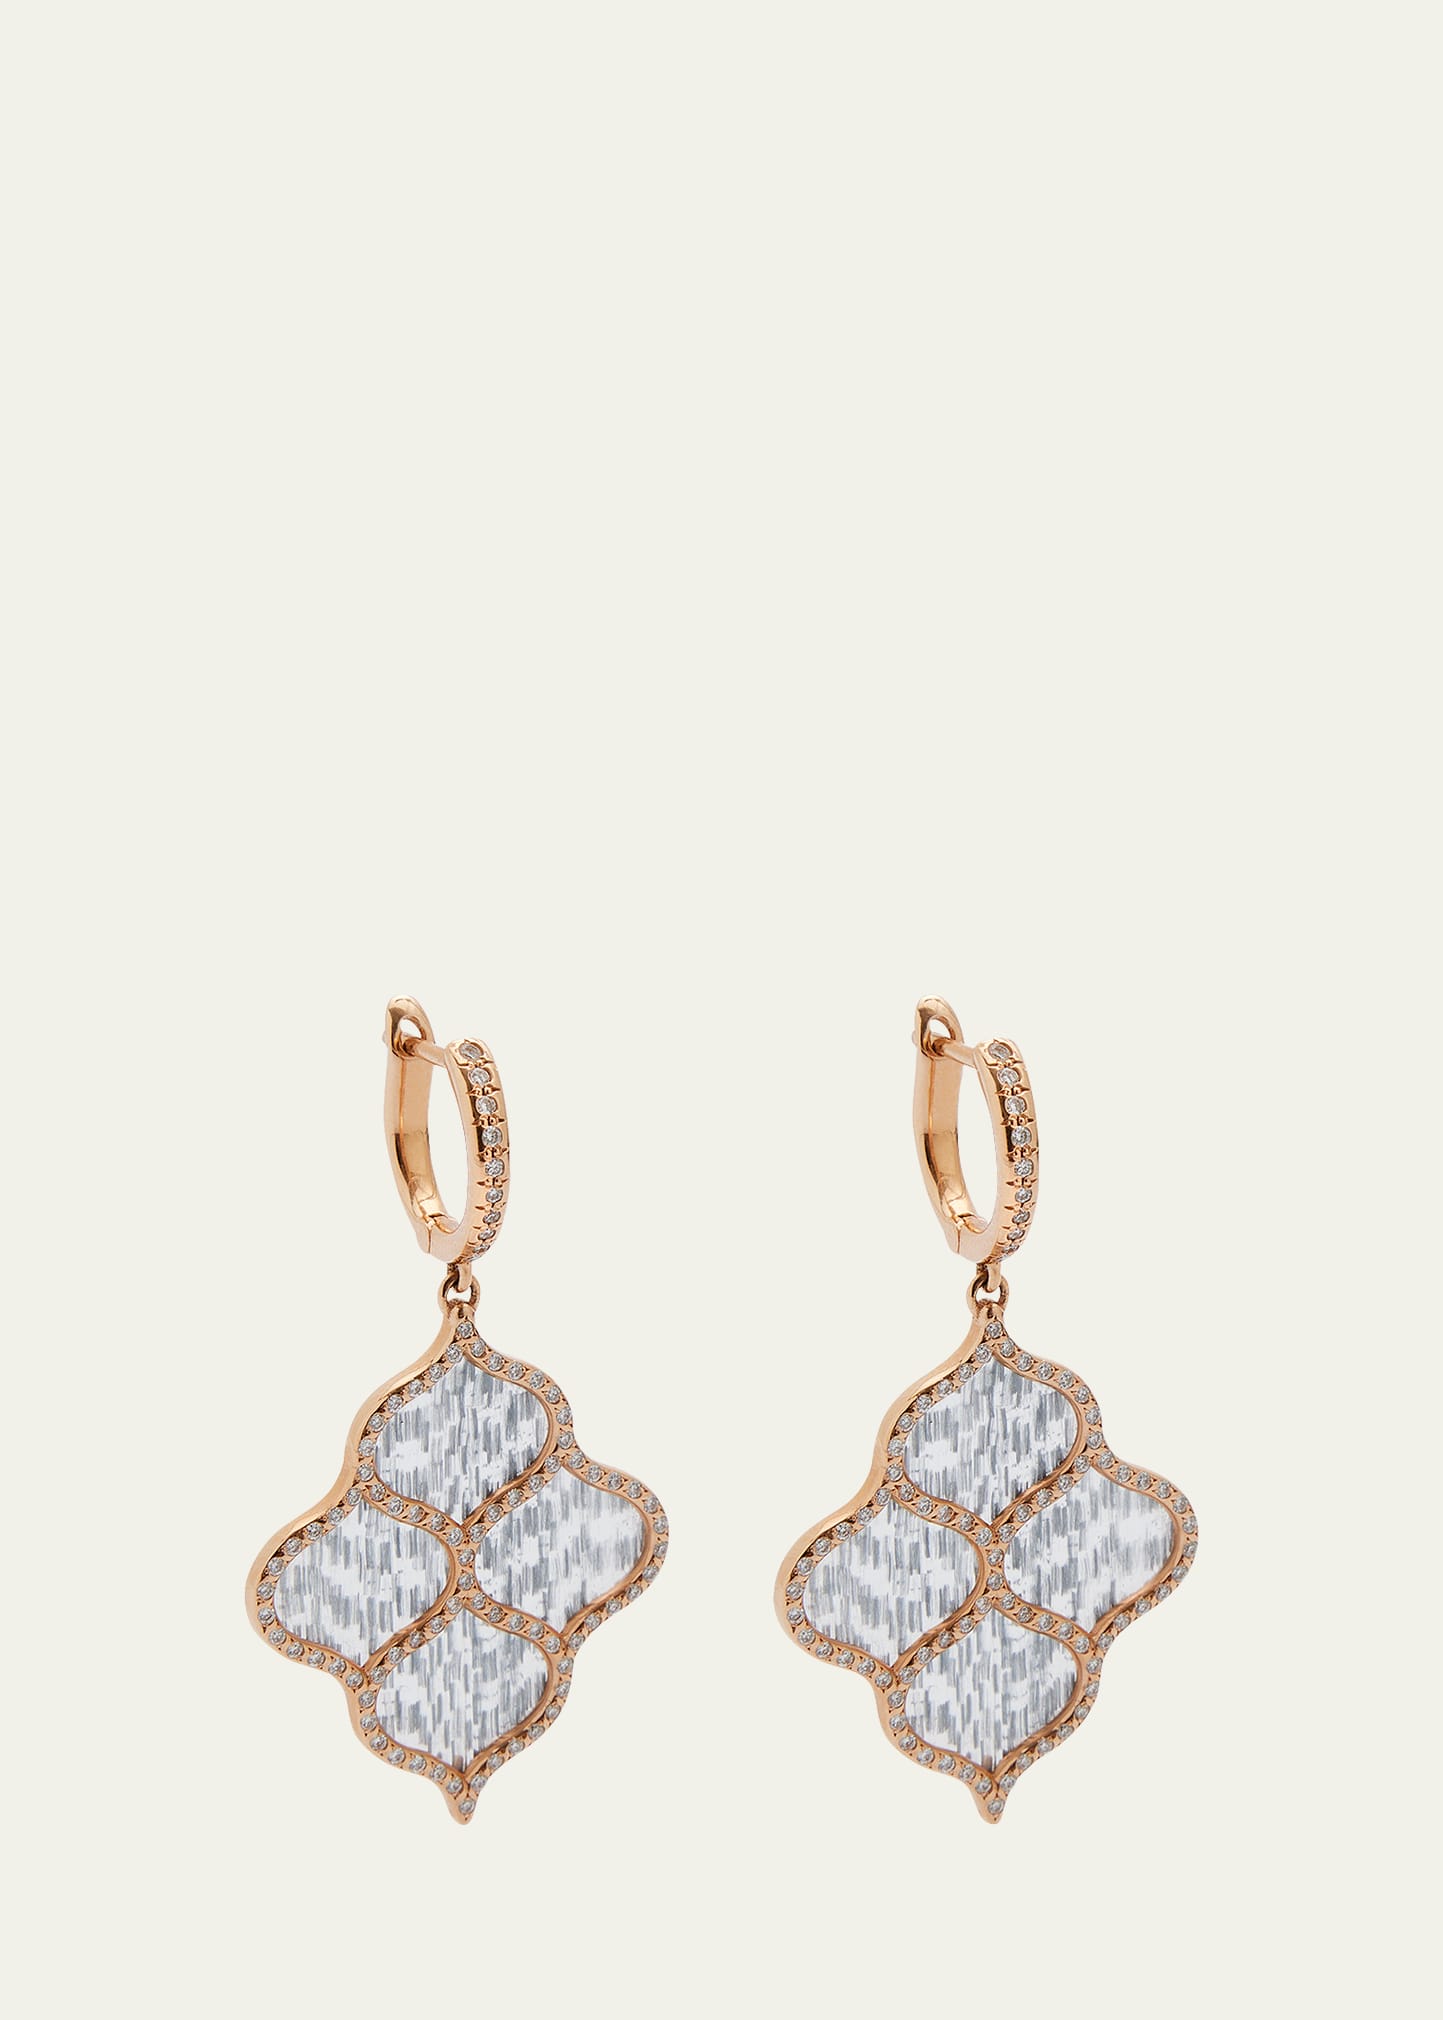 Rose Gold Earrings with Diamonds